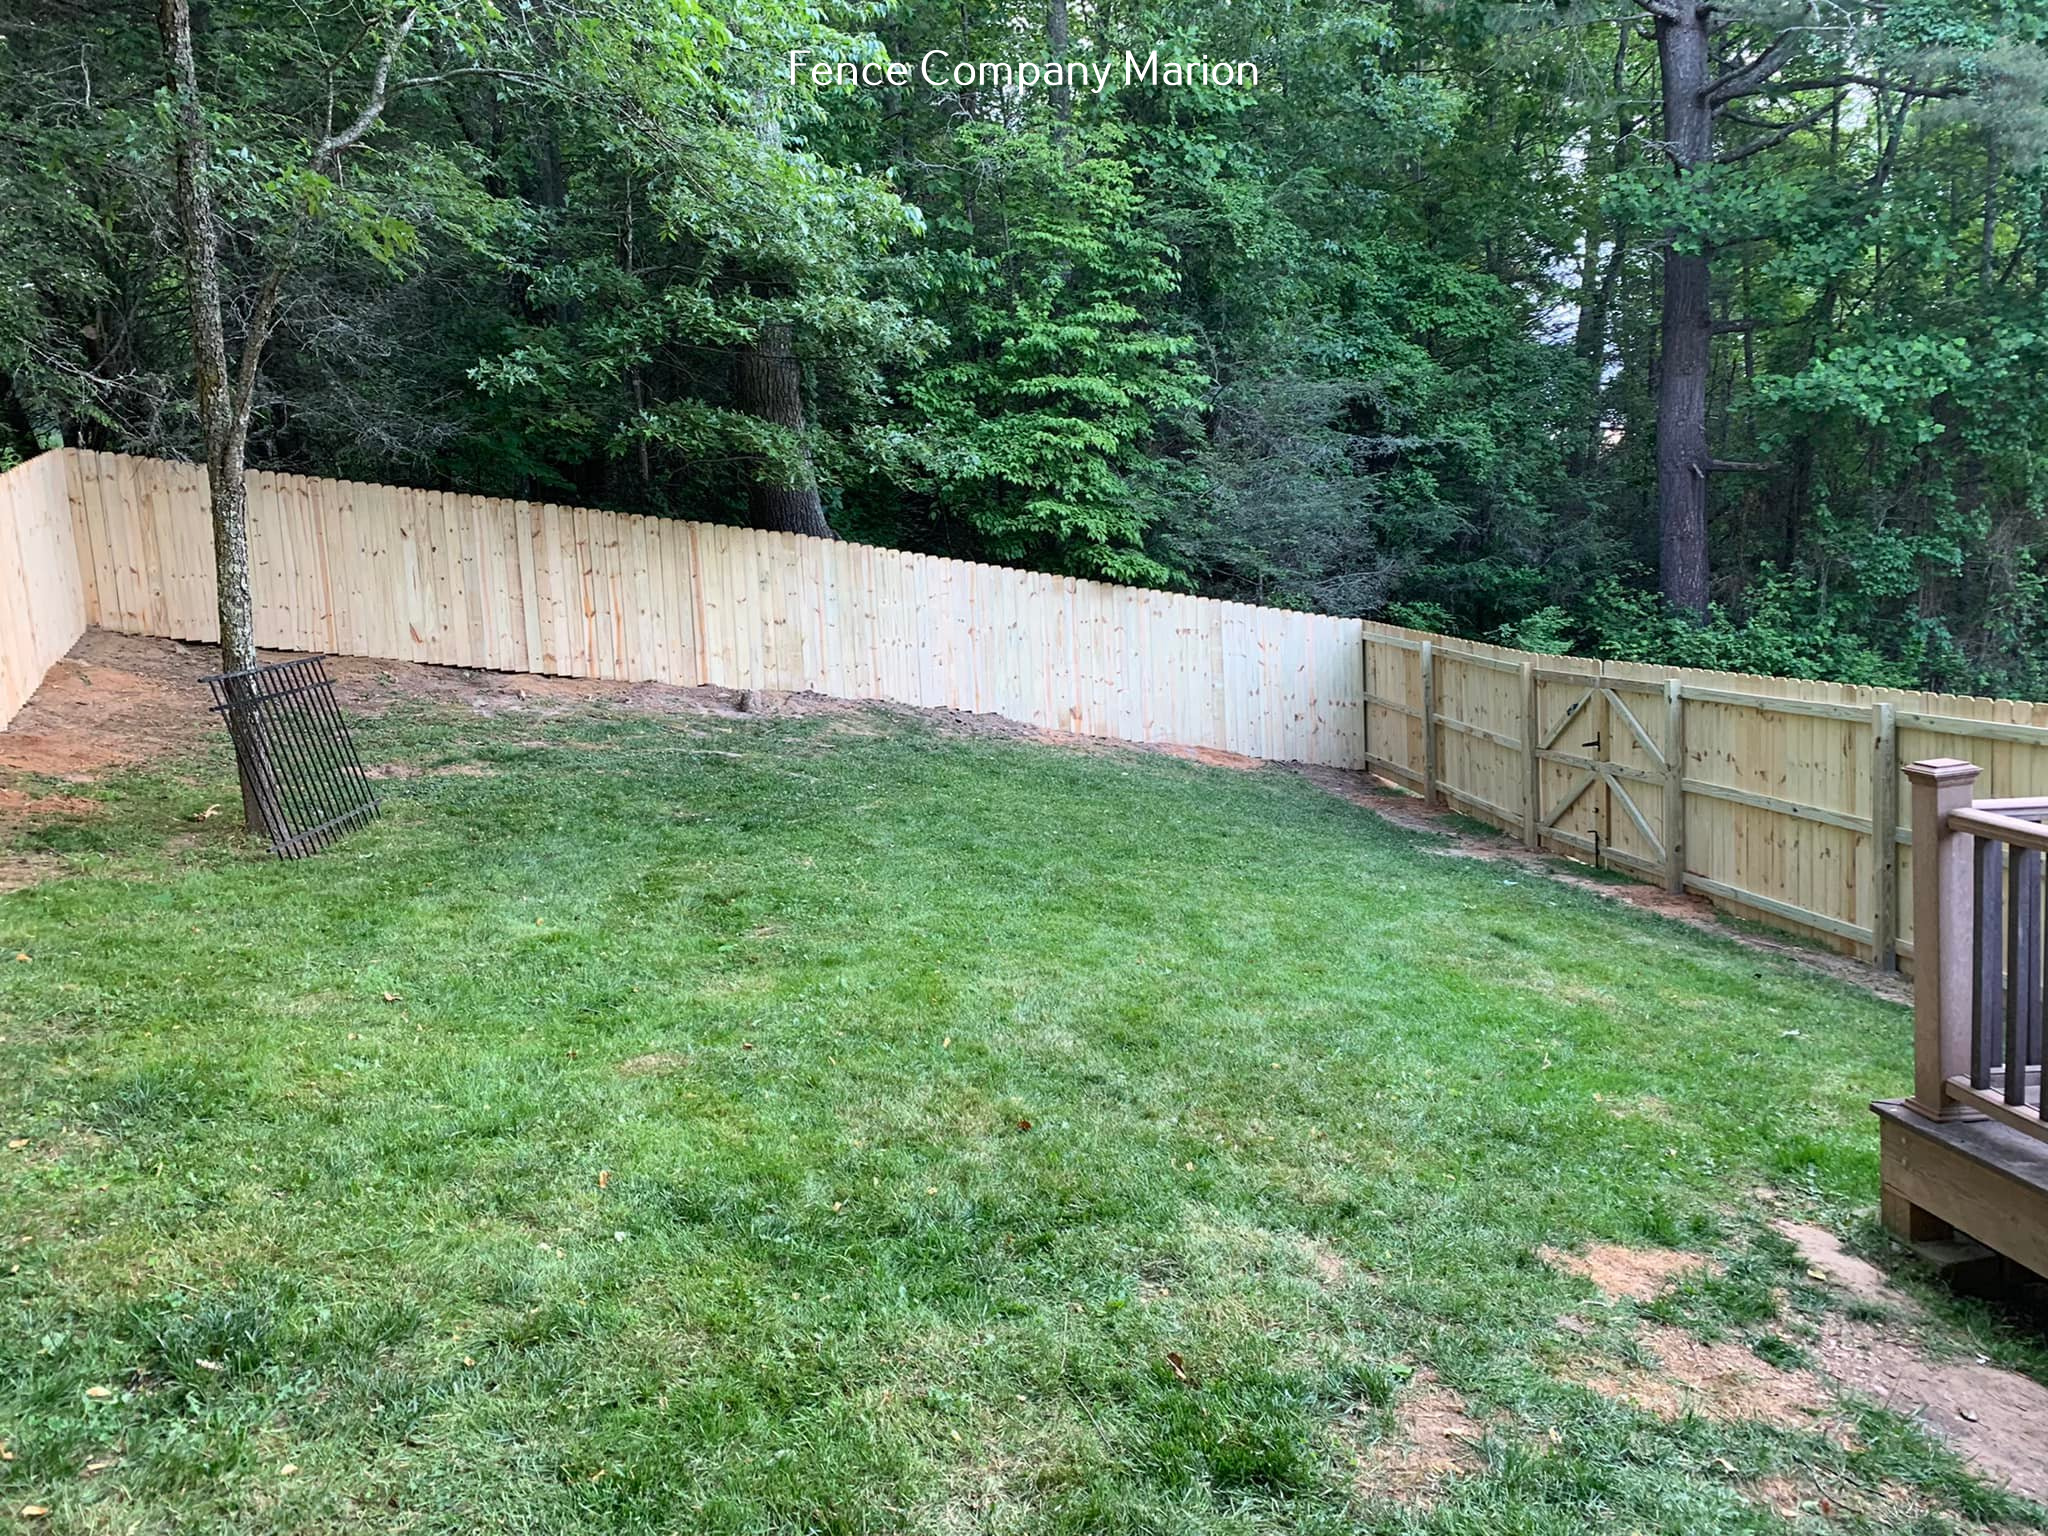 Elite Lawncare and Fence Outlines the Importance of Hiring Professional Fence Company